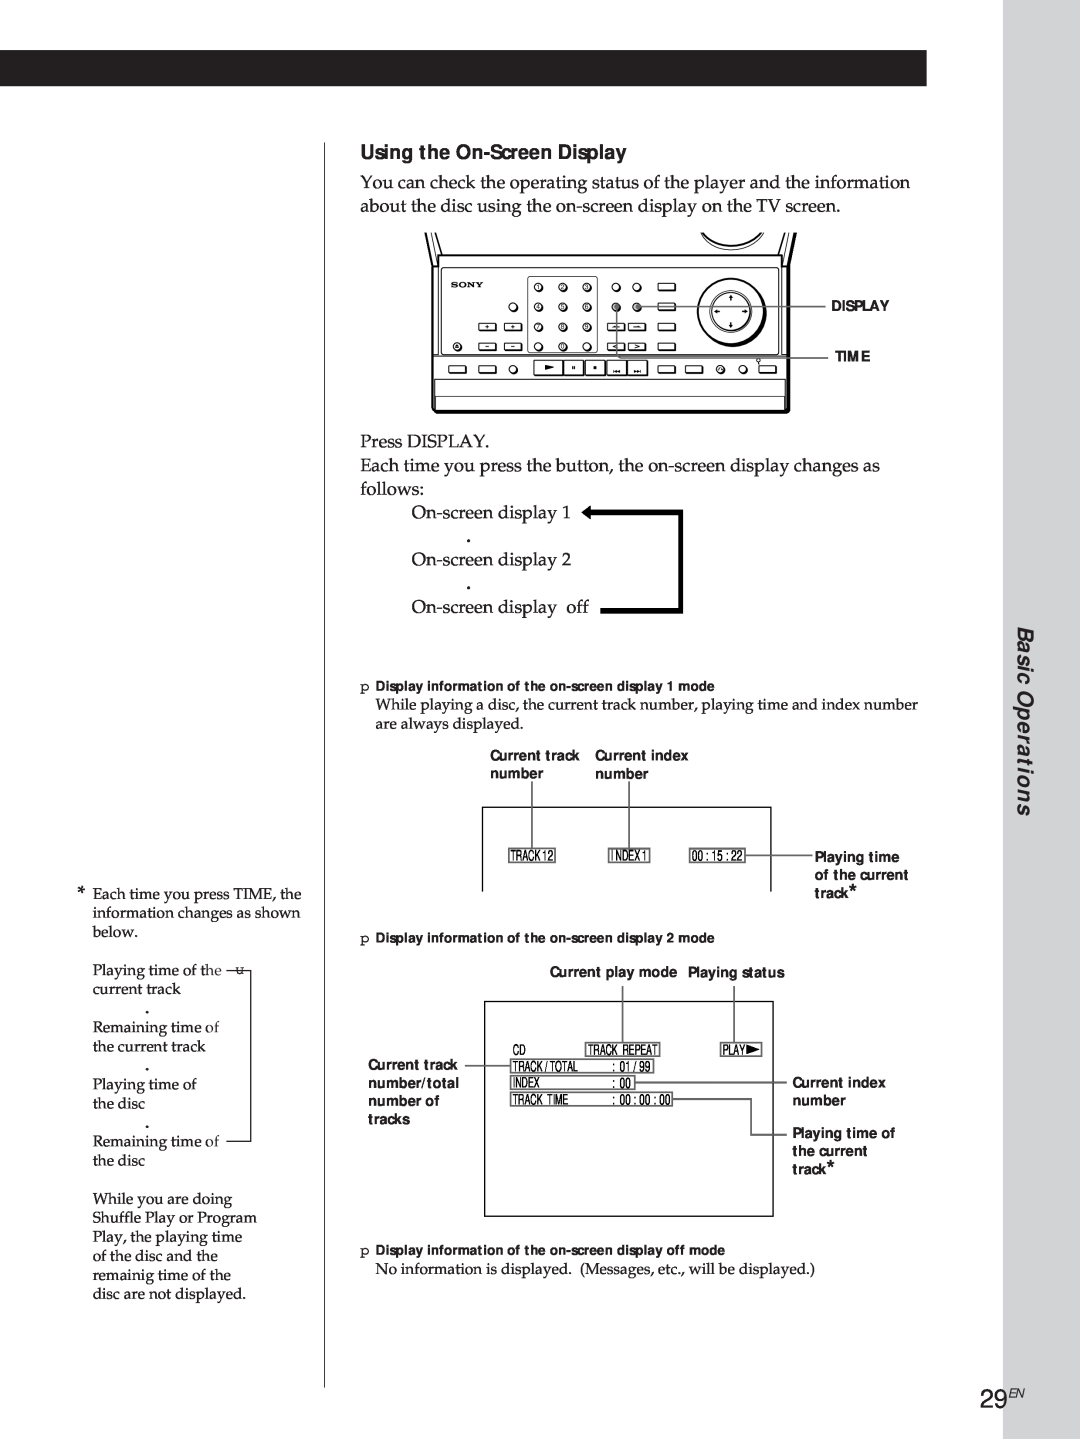 Sony DVP3980 manual 29EN, Basic Operations, Using the On-Screen Display 